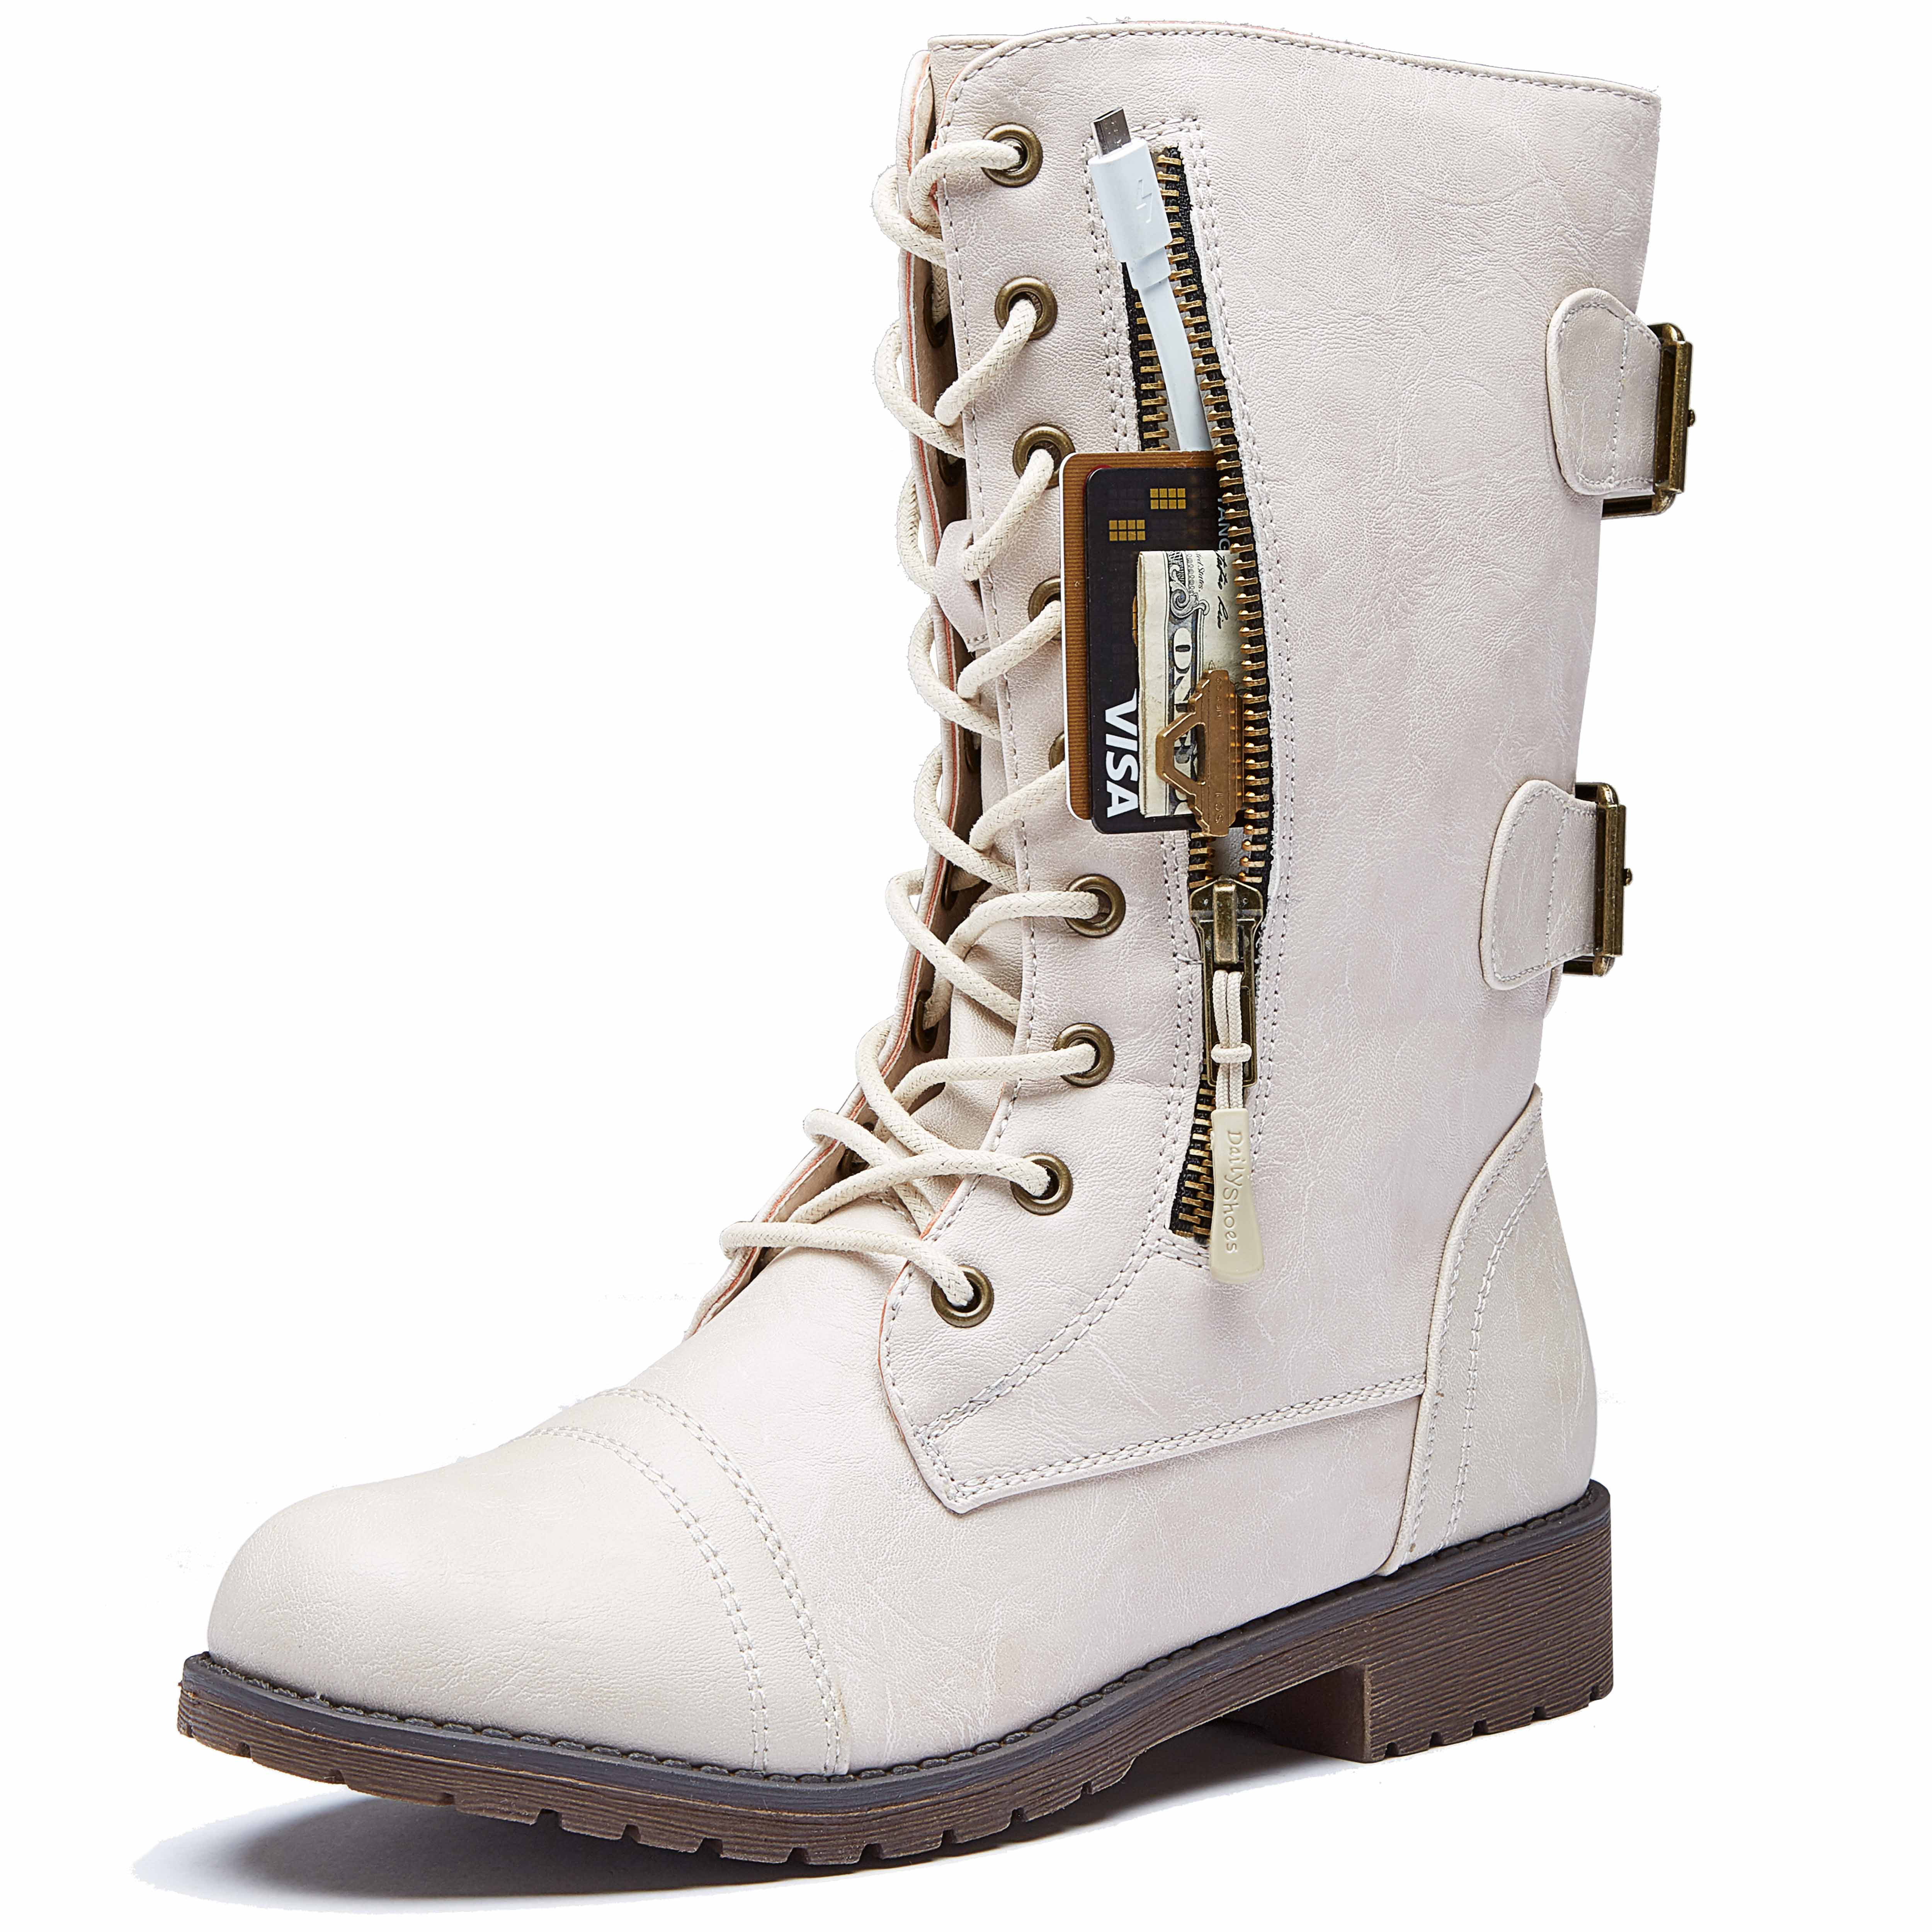 DailyShoes Womens Military Lace Up Buckle Combat Boots Mid Knee High Exclusive Credit Card Pocket Ivory 